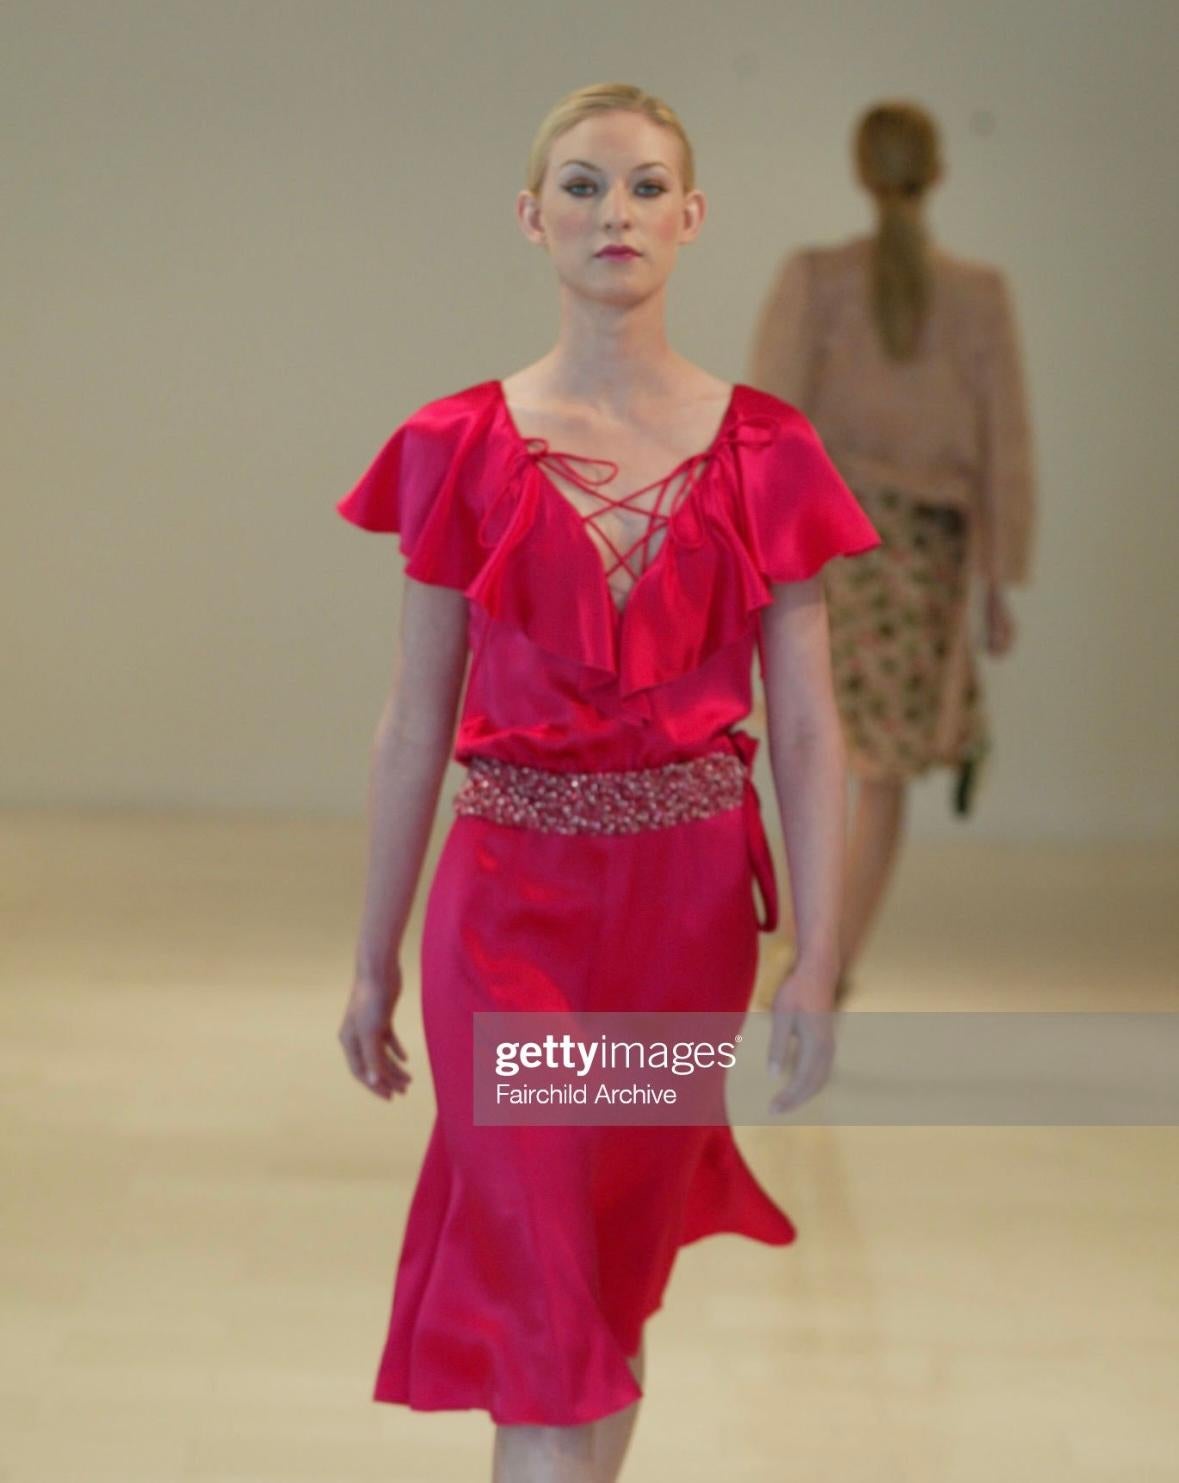 Presenting a beautiful pink silk satin ruffle dress designed by Valentino Garavani for his Resort 2004 collection. This fabulous dress is constructed entirely of silk satin and features ruffled petal sleeves, a plunging neckline with lace-up detail,